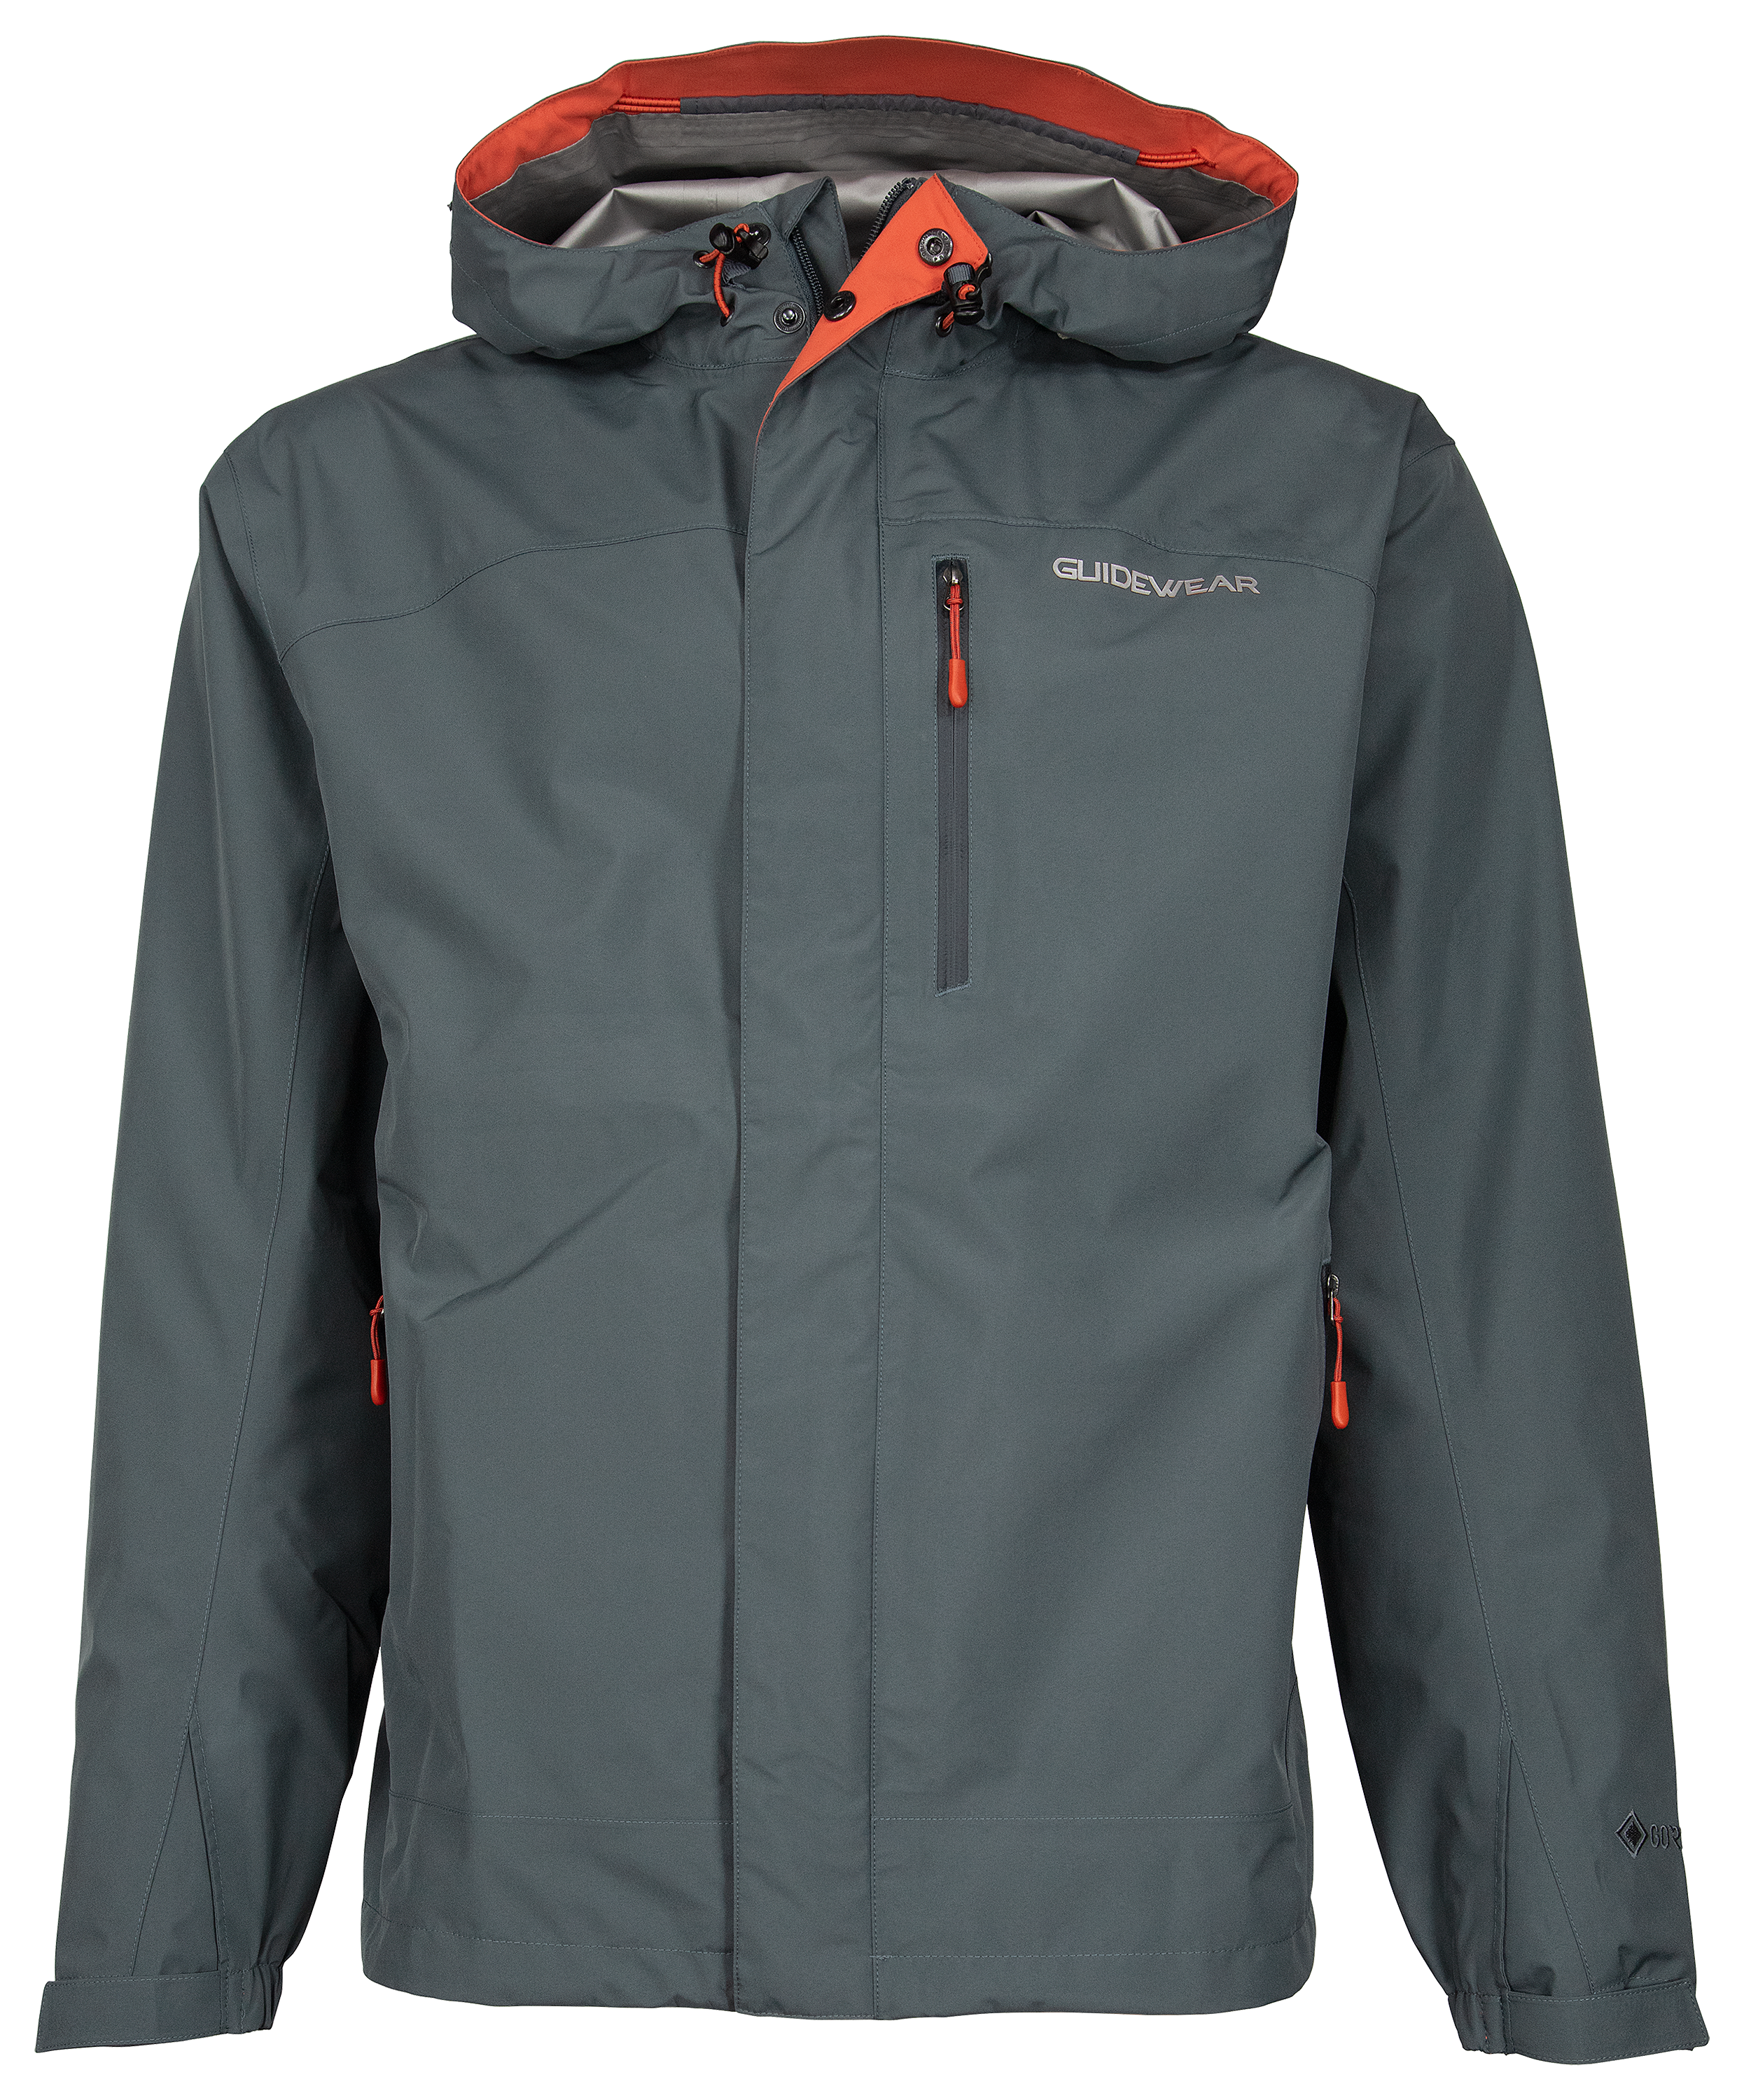 Johnny Morris Bass Pro Shops Guidewear Rainy River Jacket with GORE-TEX  PacLite for Men